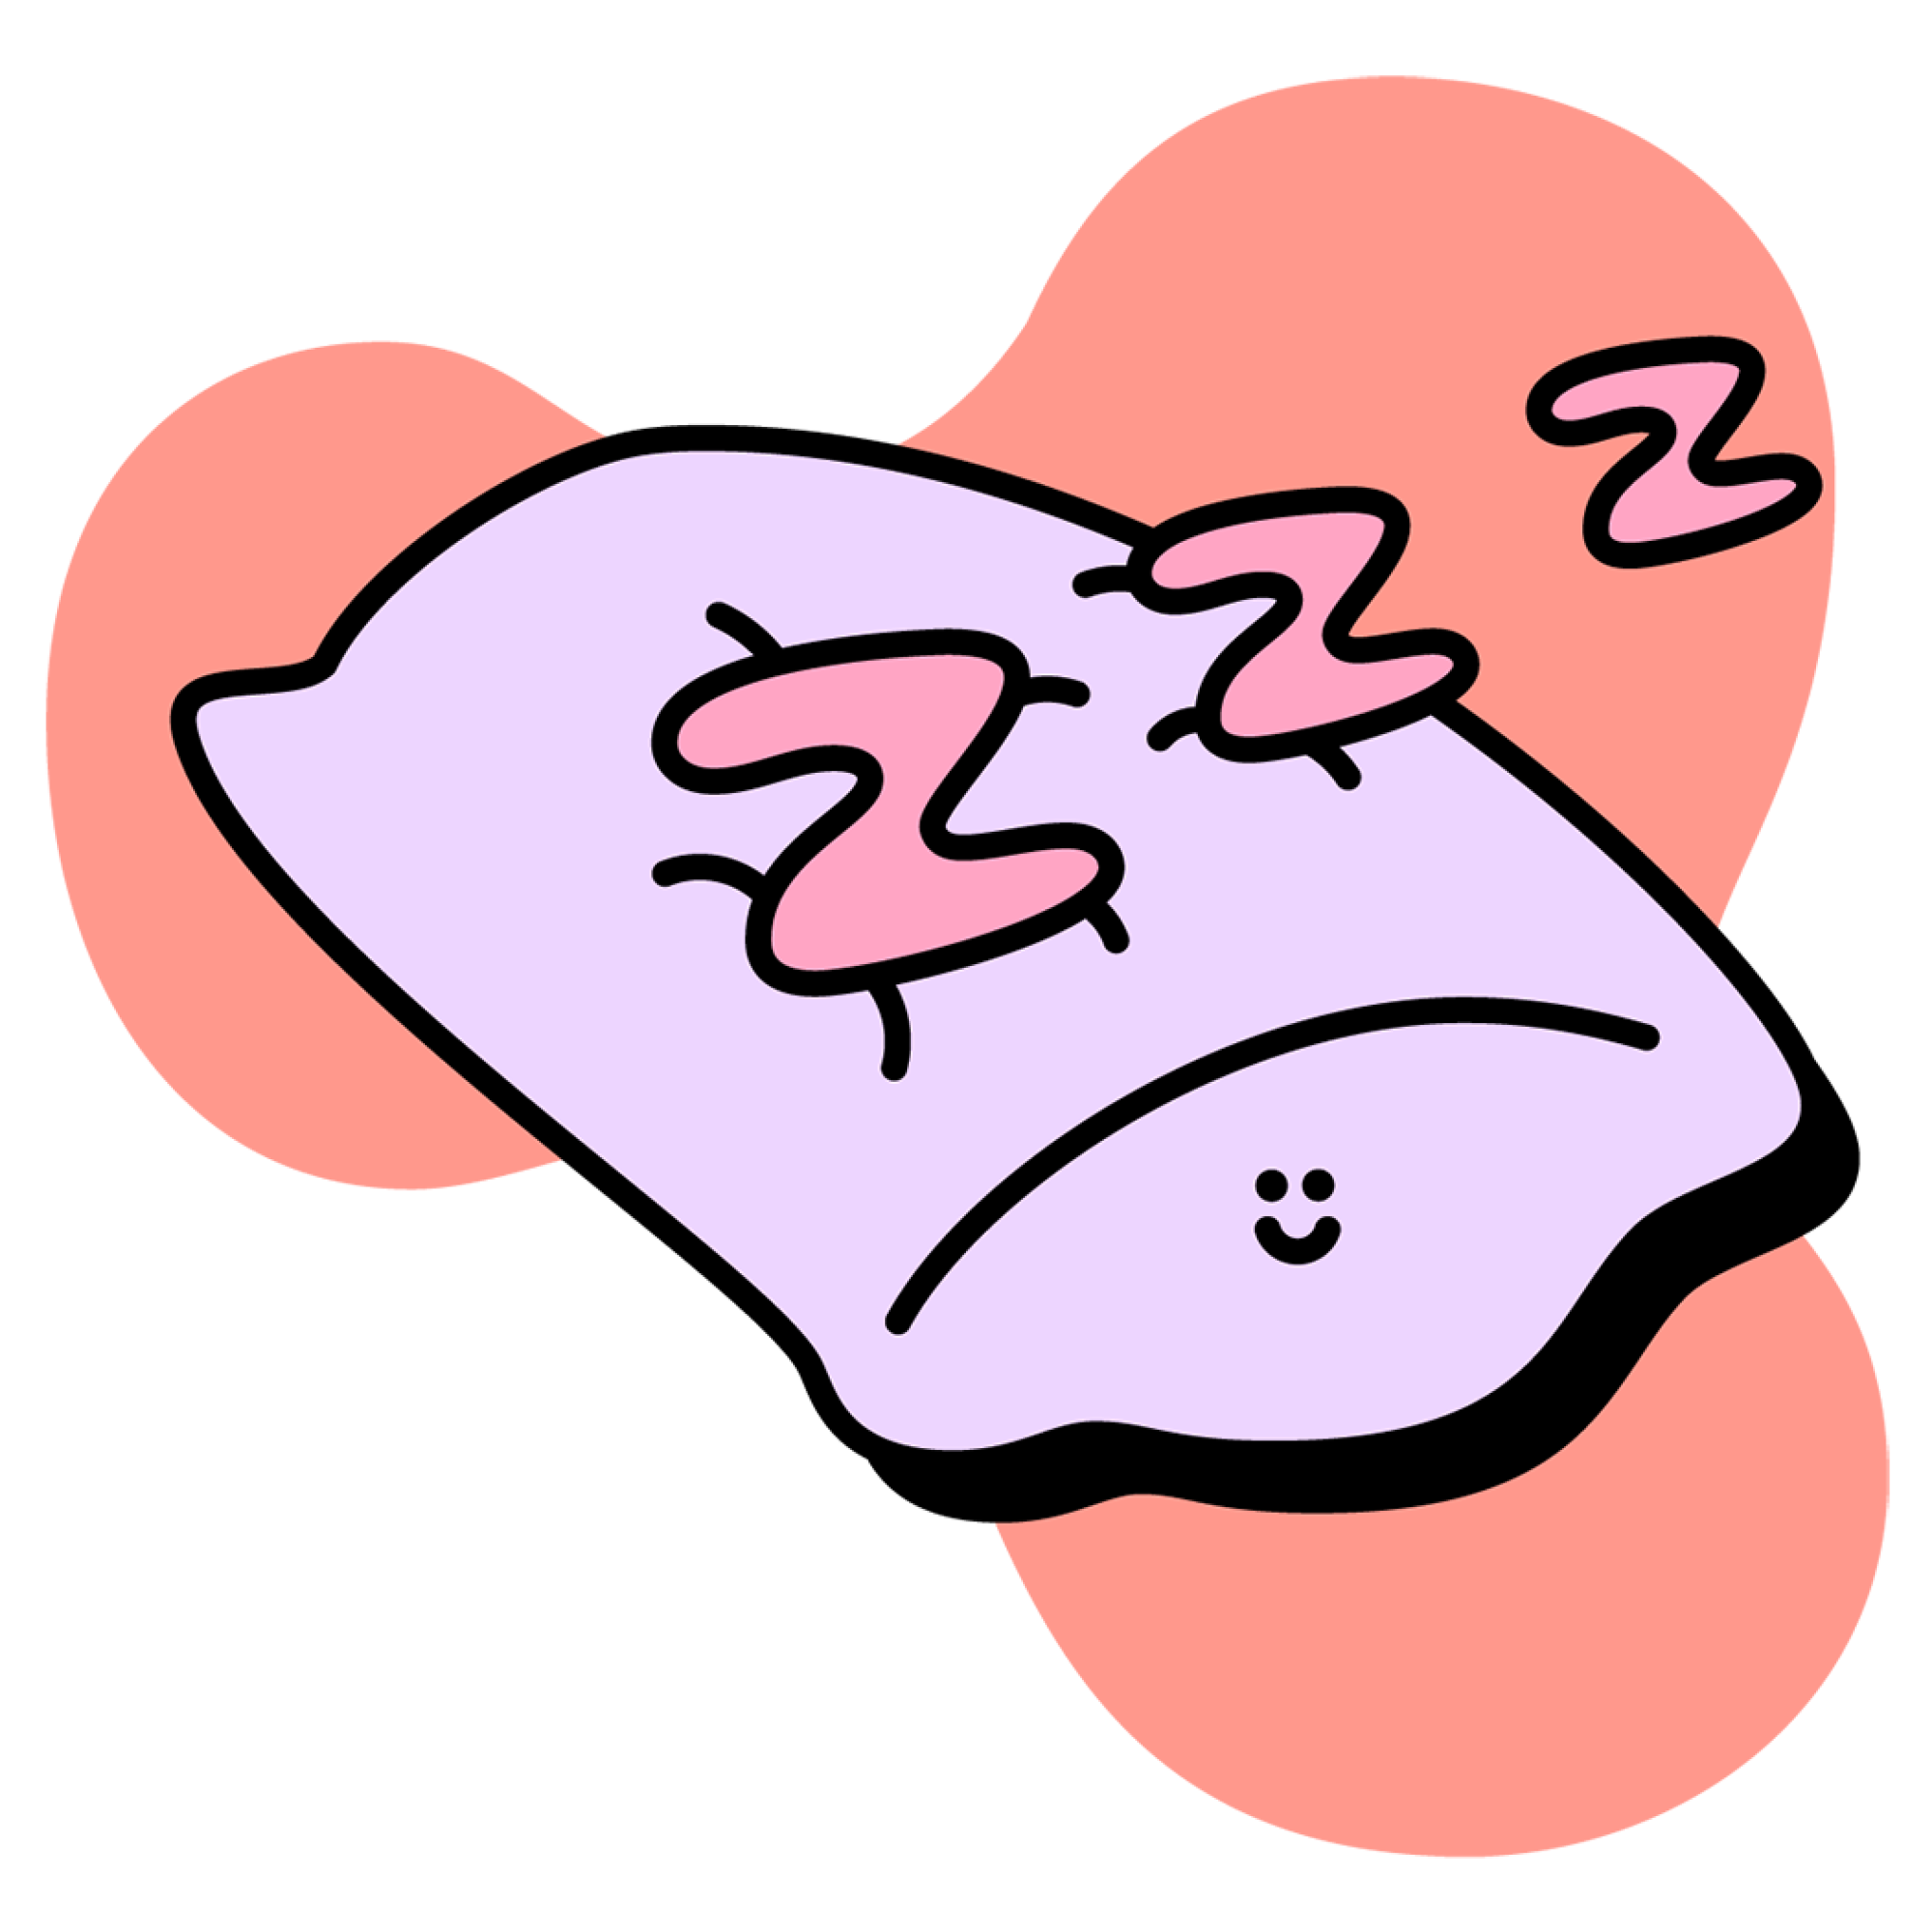 Illustration of a pillow